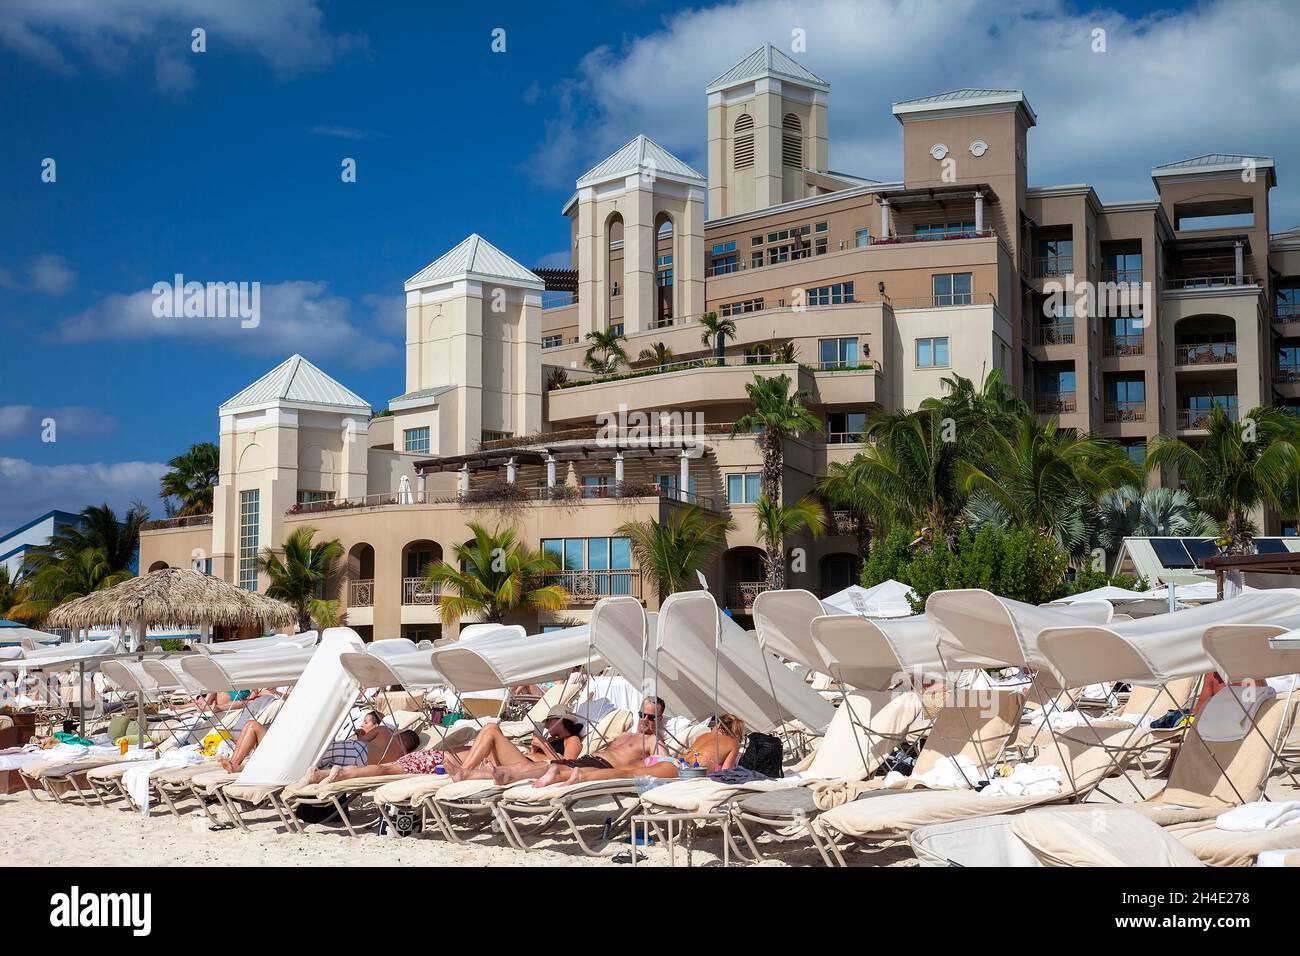 Grand Cayman, Cayman Islands - March 8, 2013:  Guests of luxury hotel relax on lounge chairs on the beach in Grand Cayman, Cayman Islands. Stock Photo